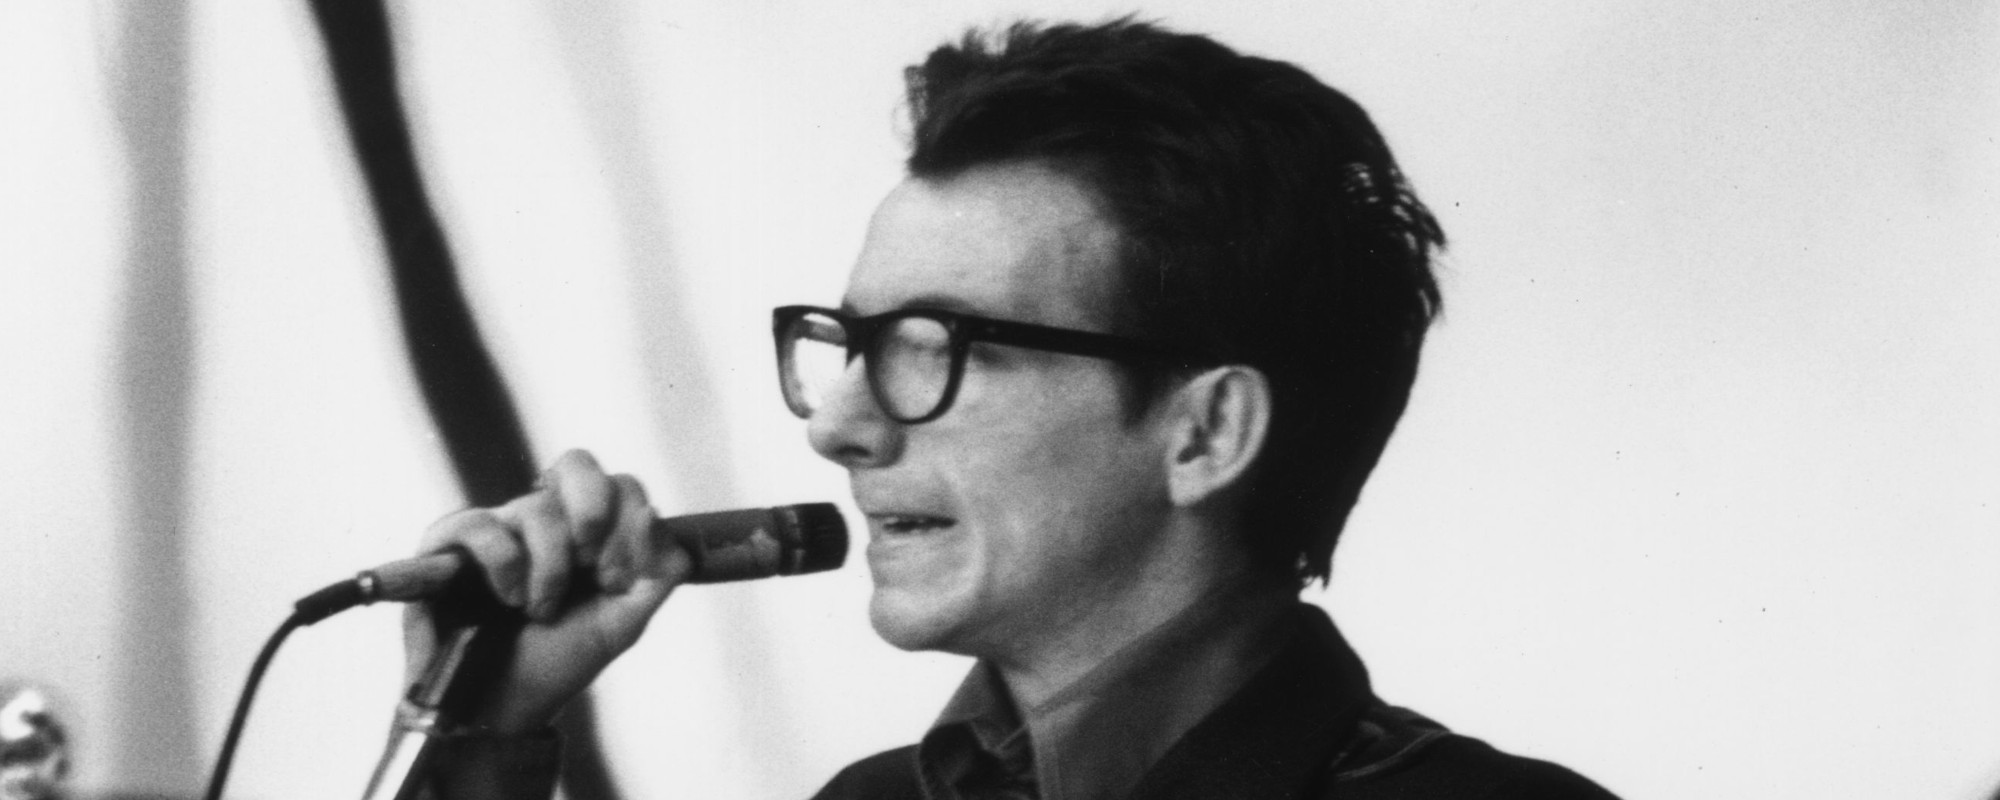 The Meaning Behind Elvis Costello & The Attractions’ “Everyday I Write the Book”